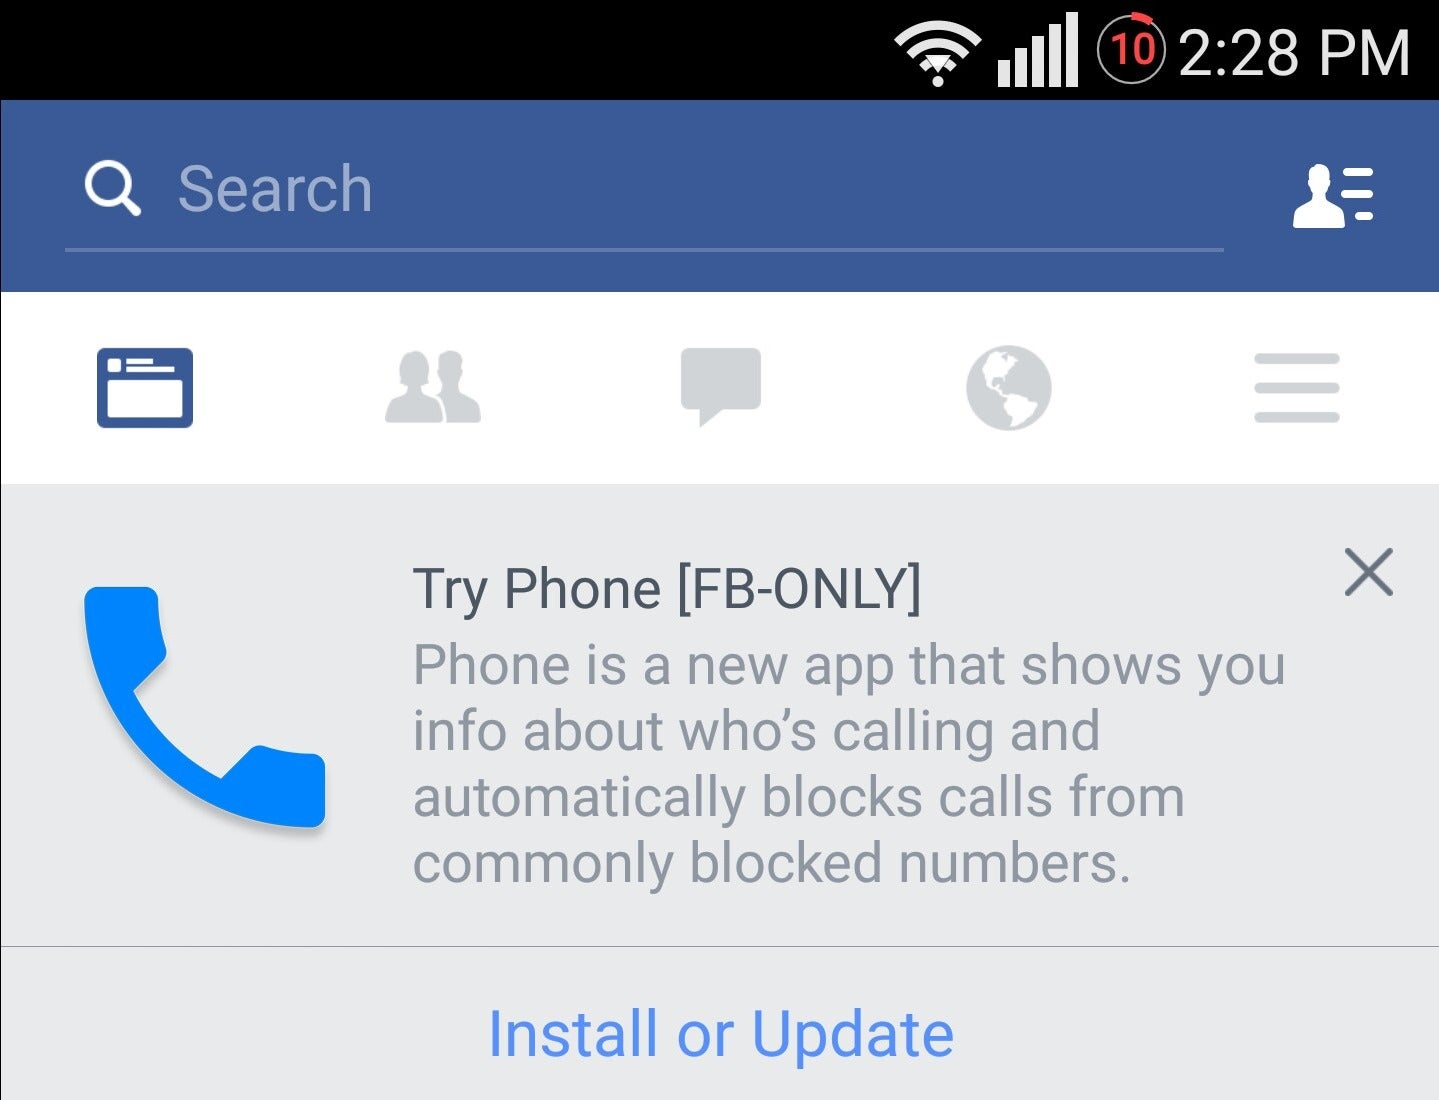 Facebook testing an Android dialer app that gets rid of unsolicited calls